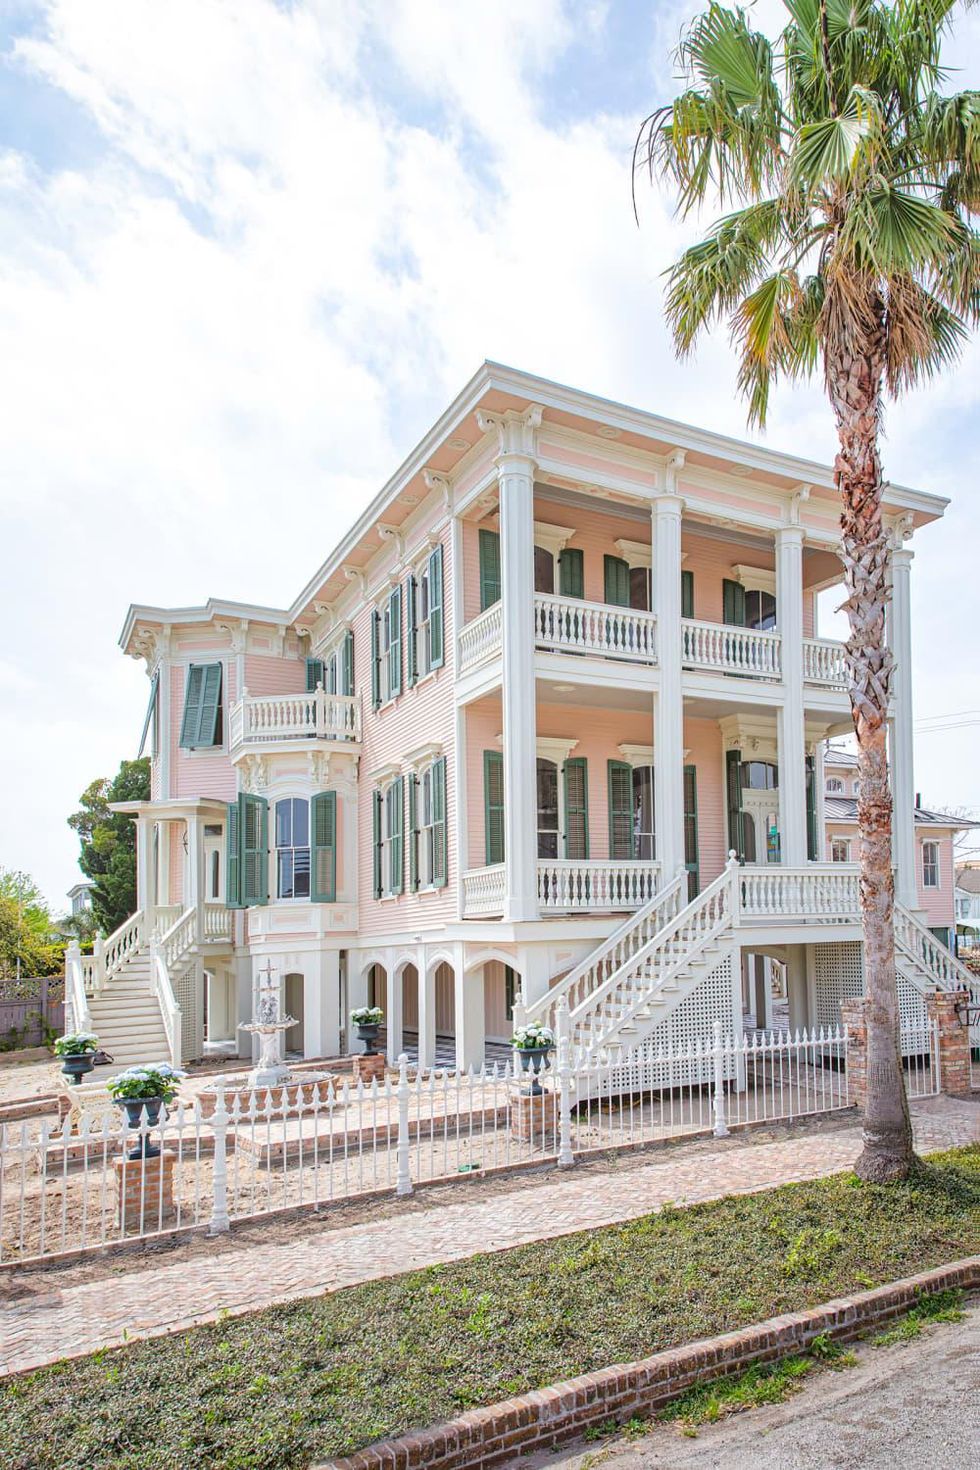 Step back in time inside 9 grand and historic Galveston homes on popular annual tour